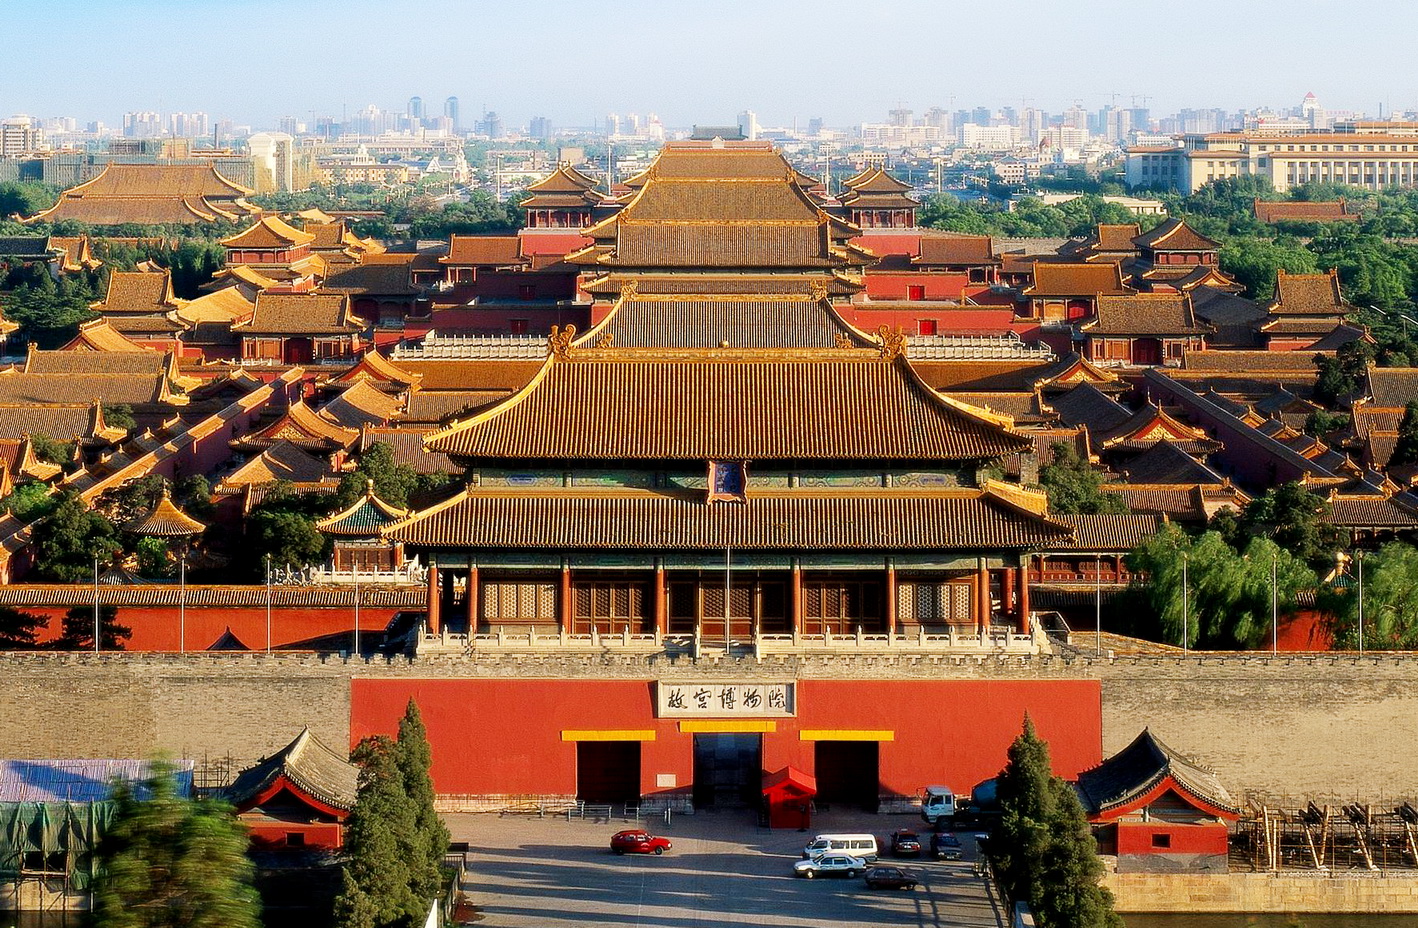 The largest palace in the world is located in China